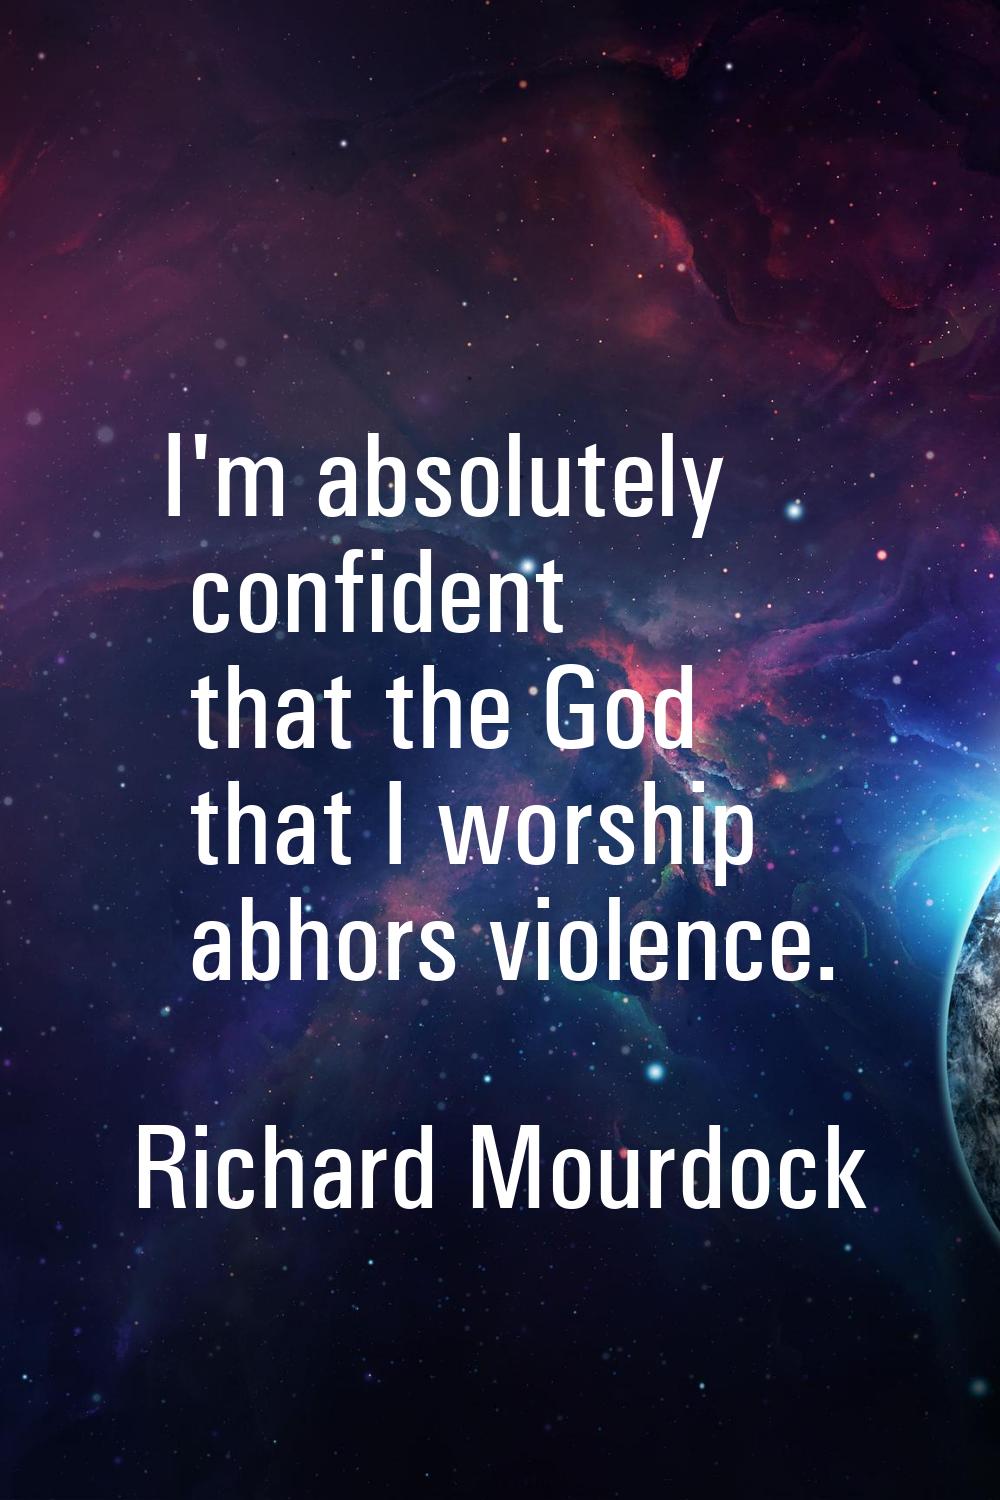 I'm absolutely confident that the God that I worship abhors violence.